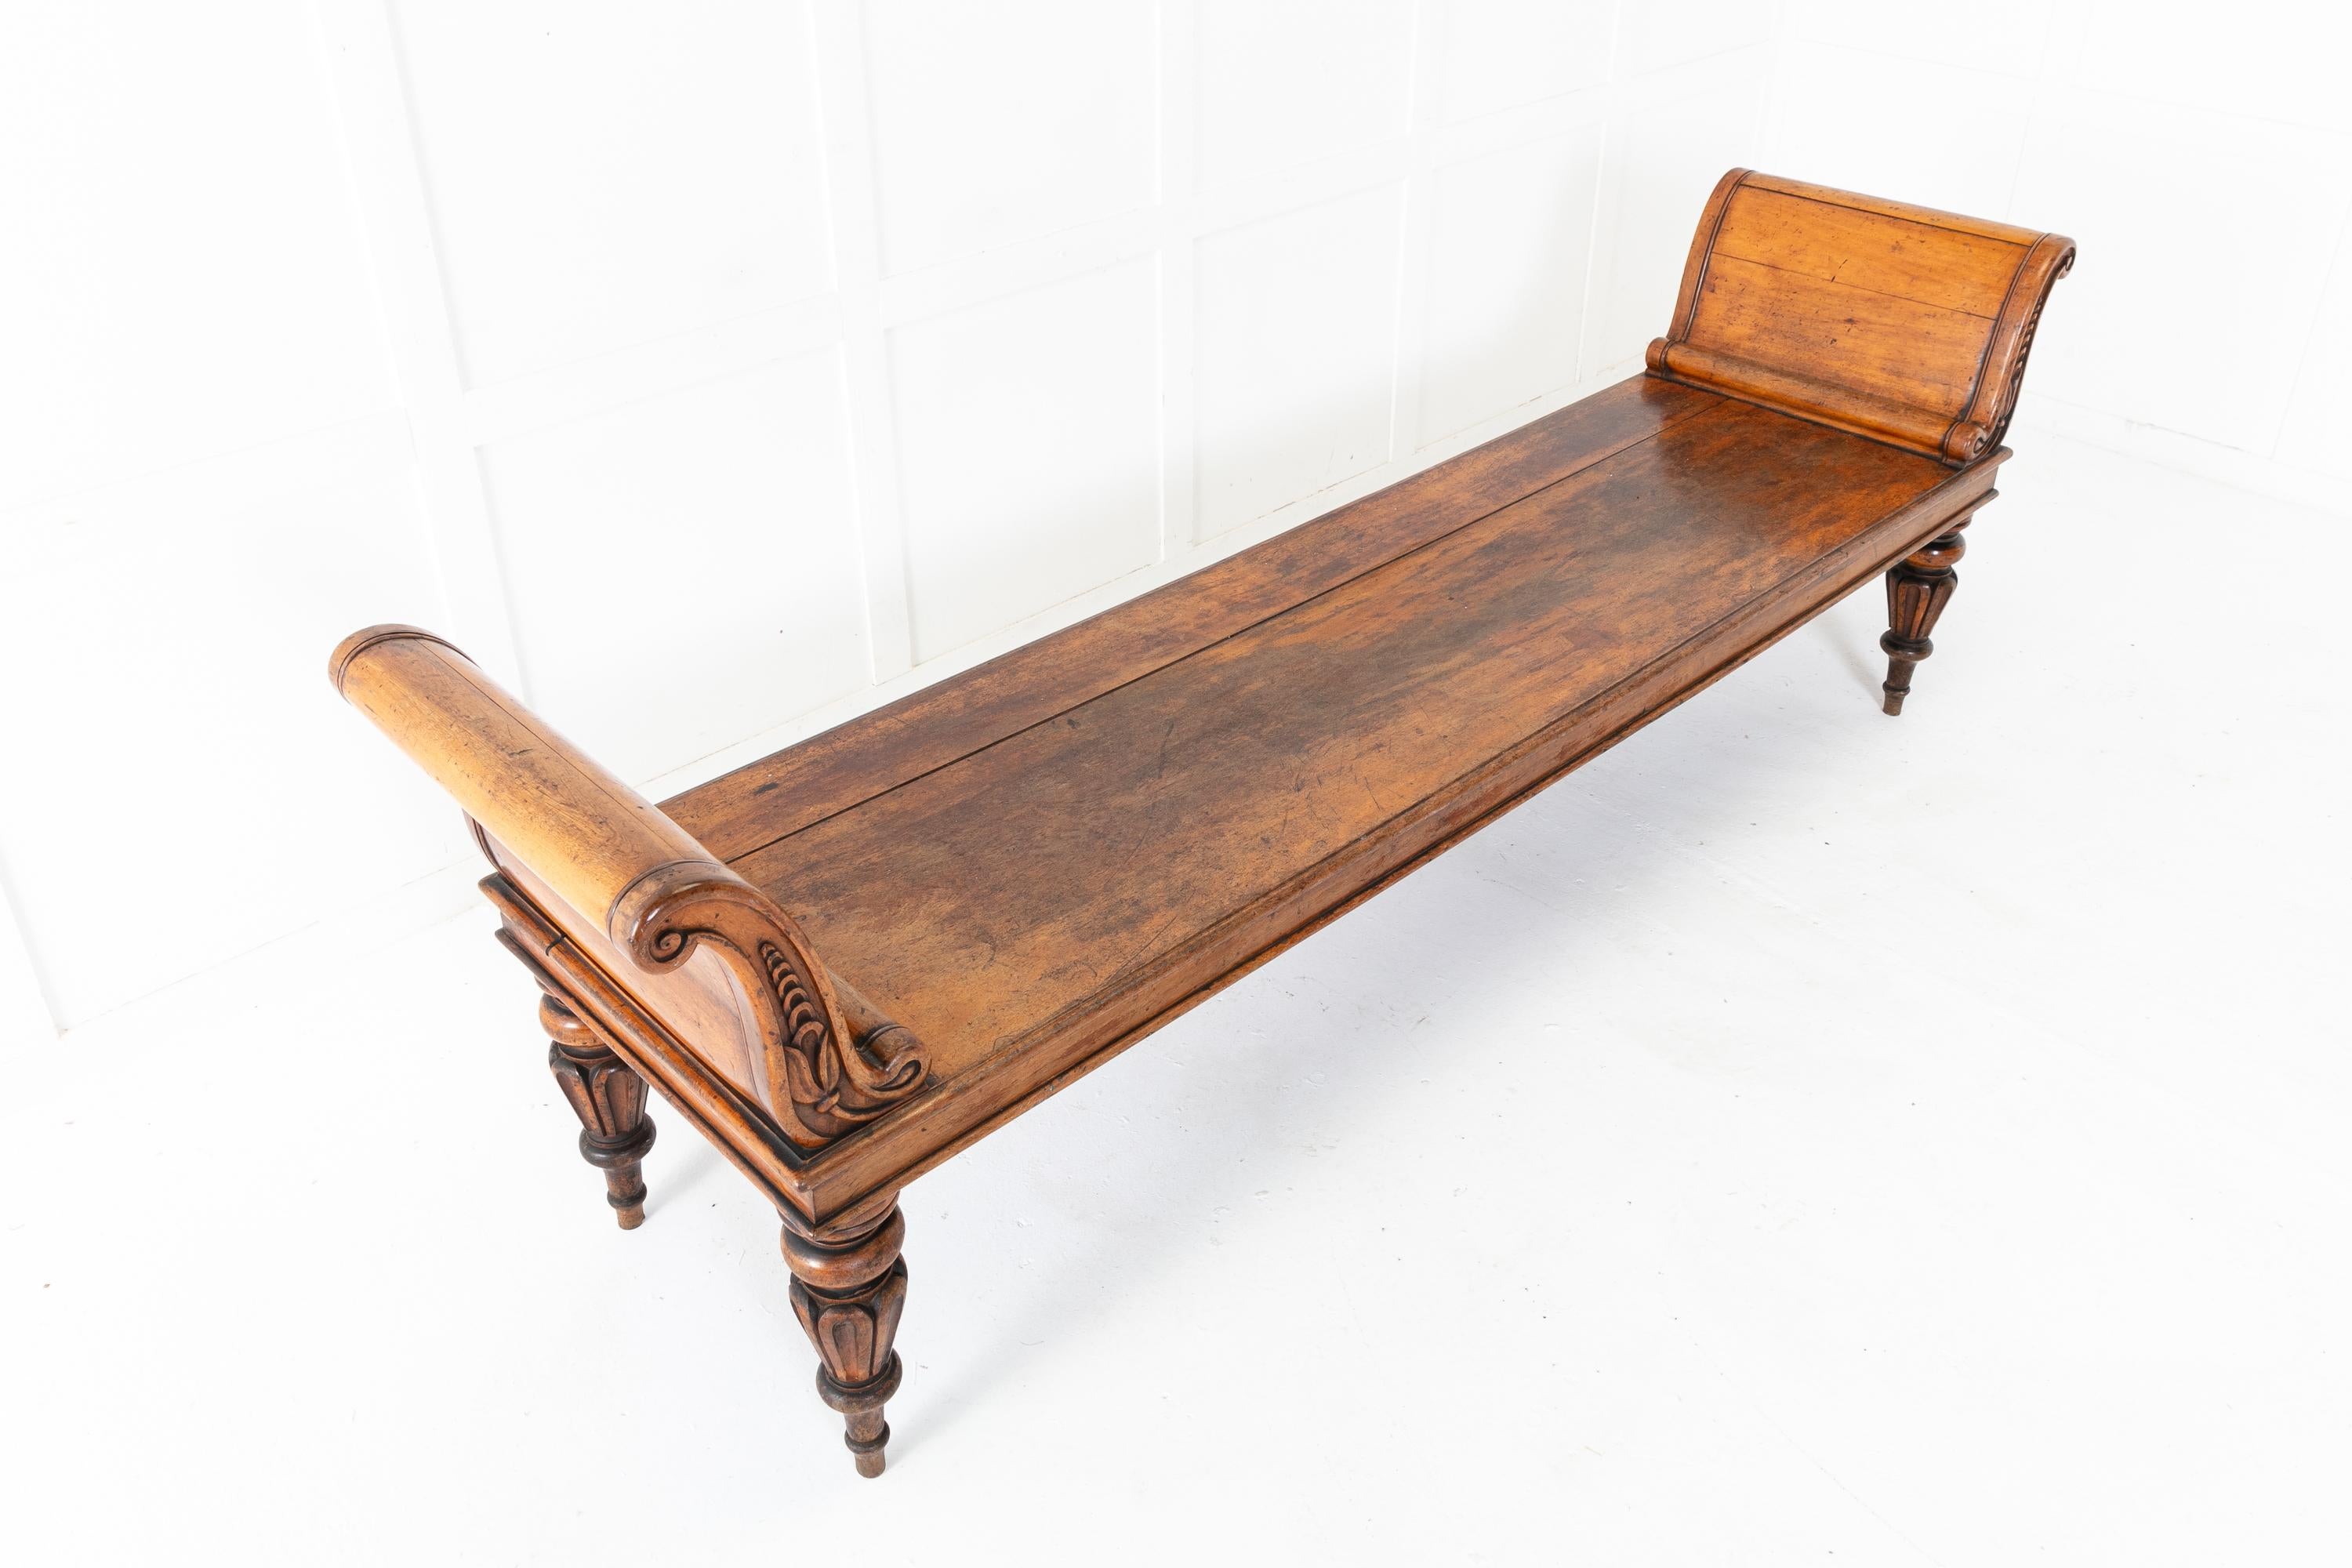 An exceptional, large, late Regency mahogany hall seat/hall bench of powerful scale. Having impressive 's' scroll ends with solid panels and carved mouldings with foliage. The large, rectangular seat has a moulded edge and a plain frieze below.